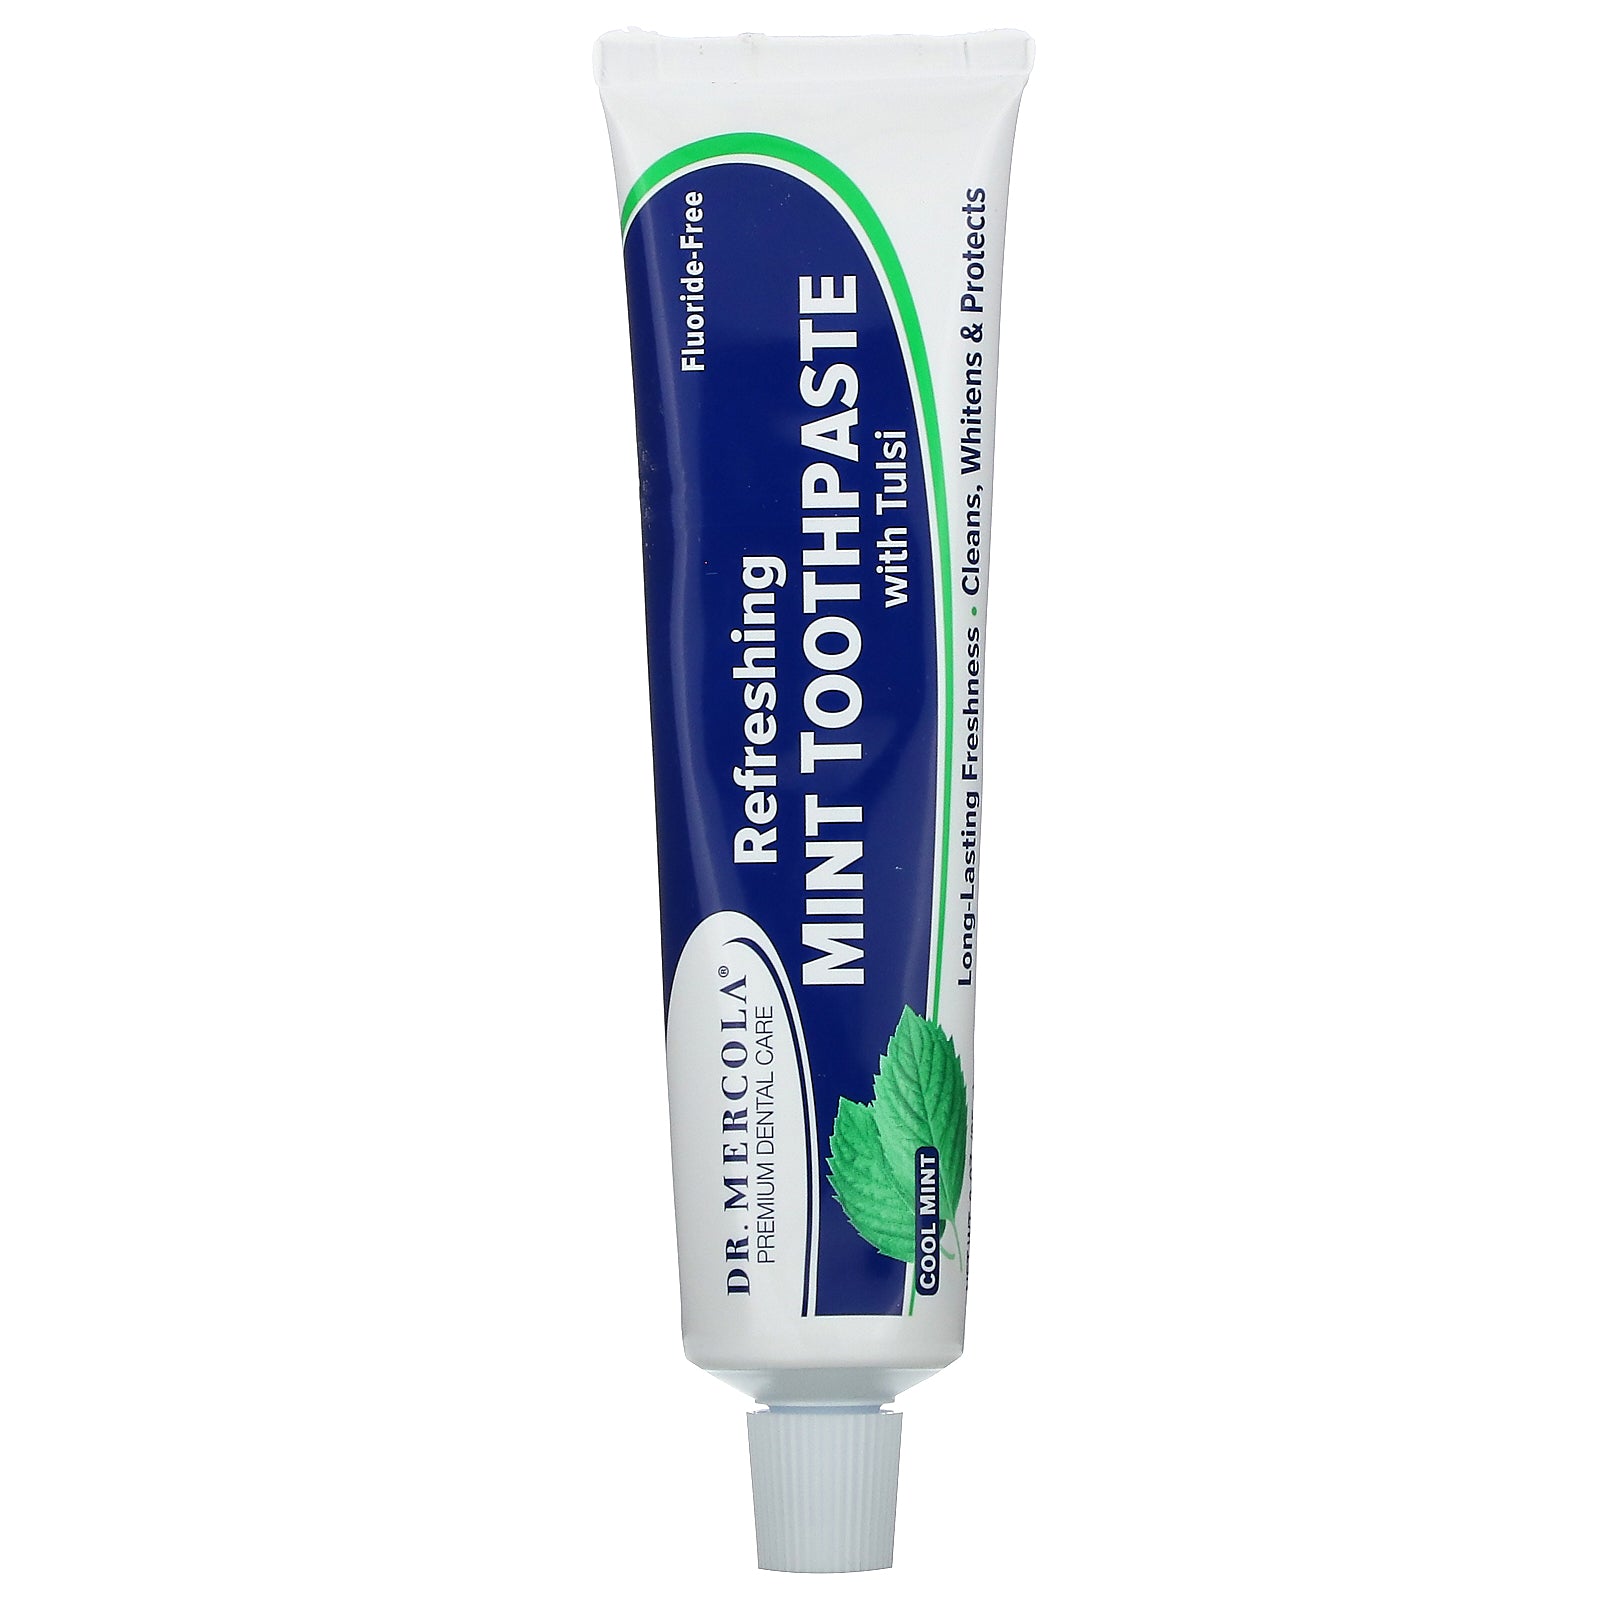 Dr. Mercola, Refreshing Toothpaste with Tulsi, Cool Mint, 3 oz (85 g)